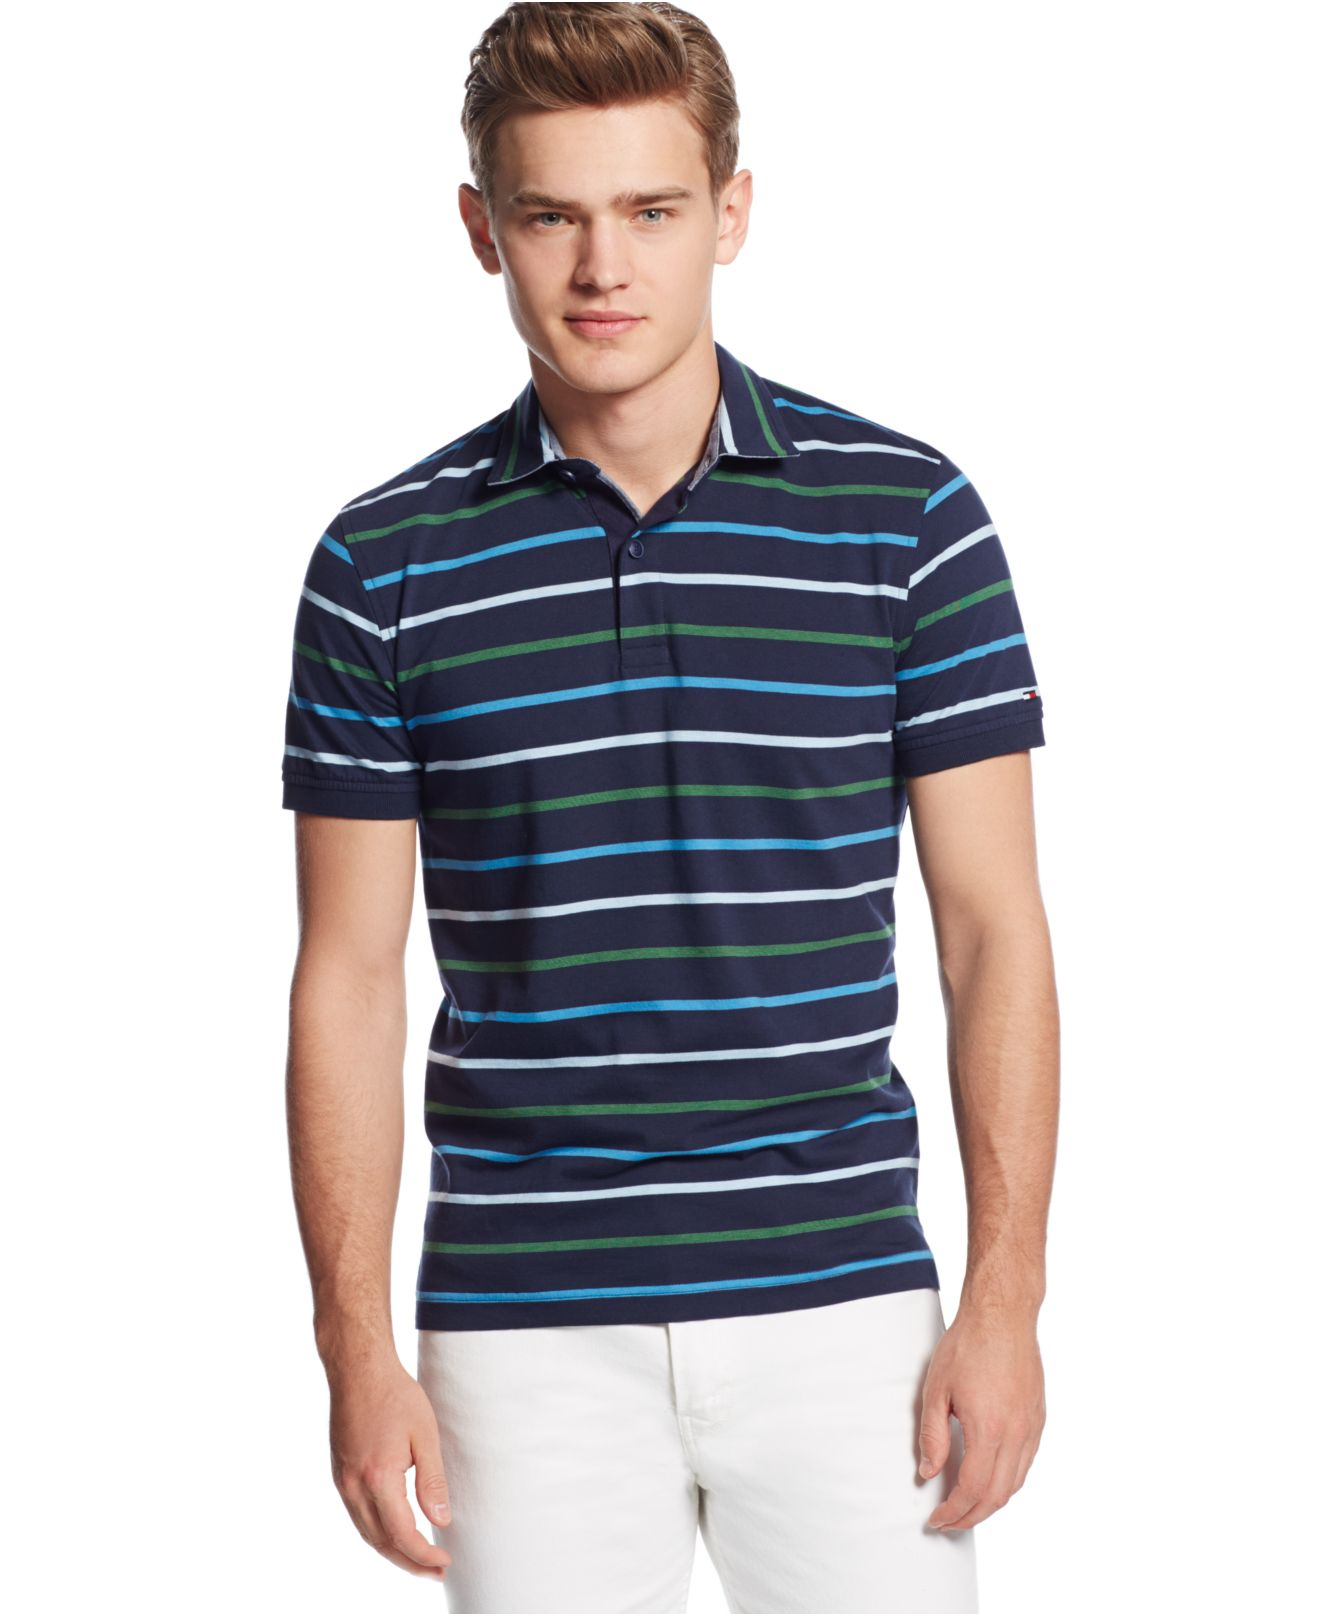 Tommy Hilfiger Theodore Striped Polo in Navy (Blue) for Men - Lyst